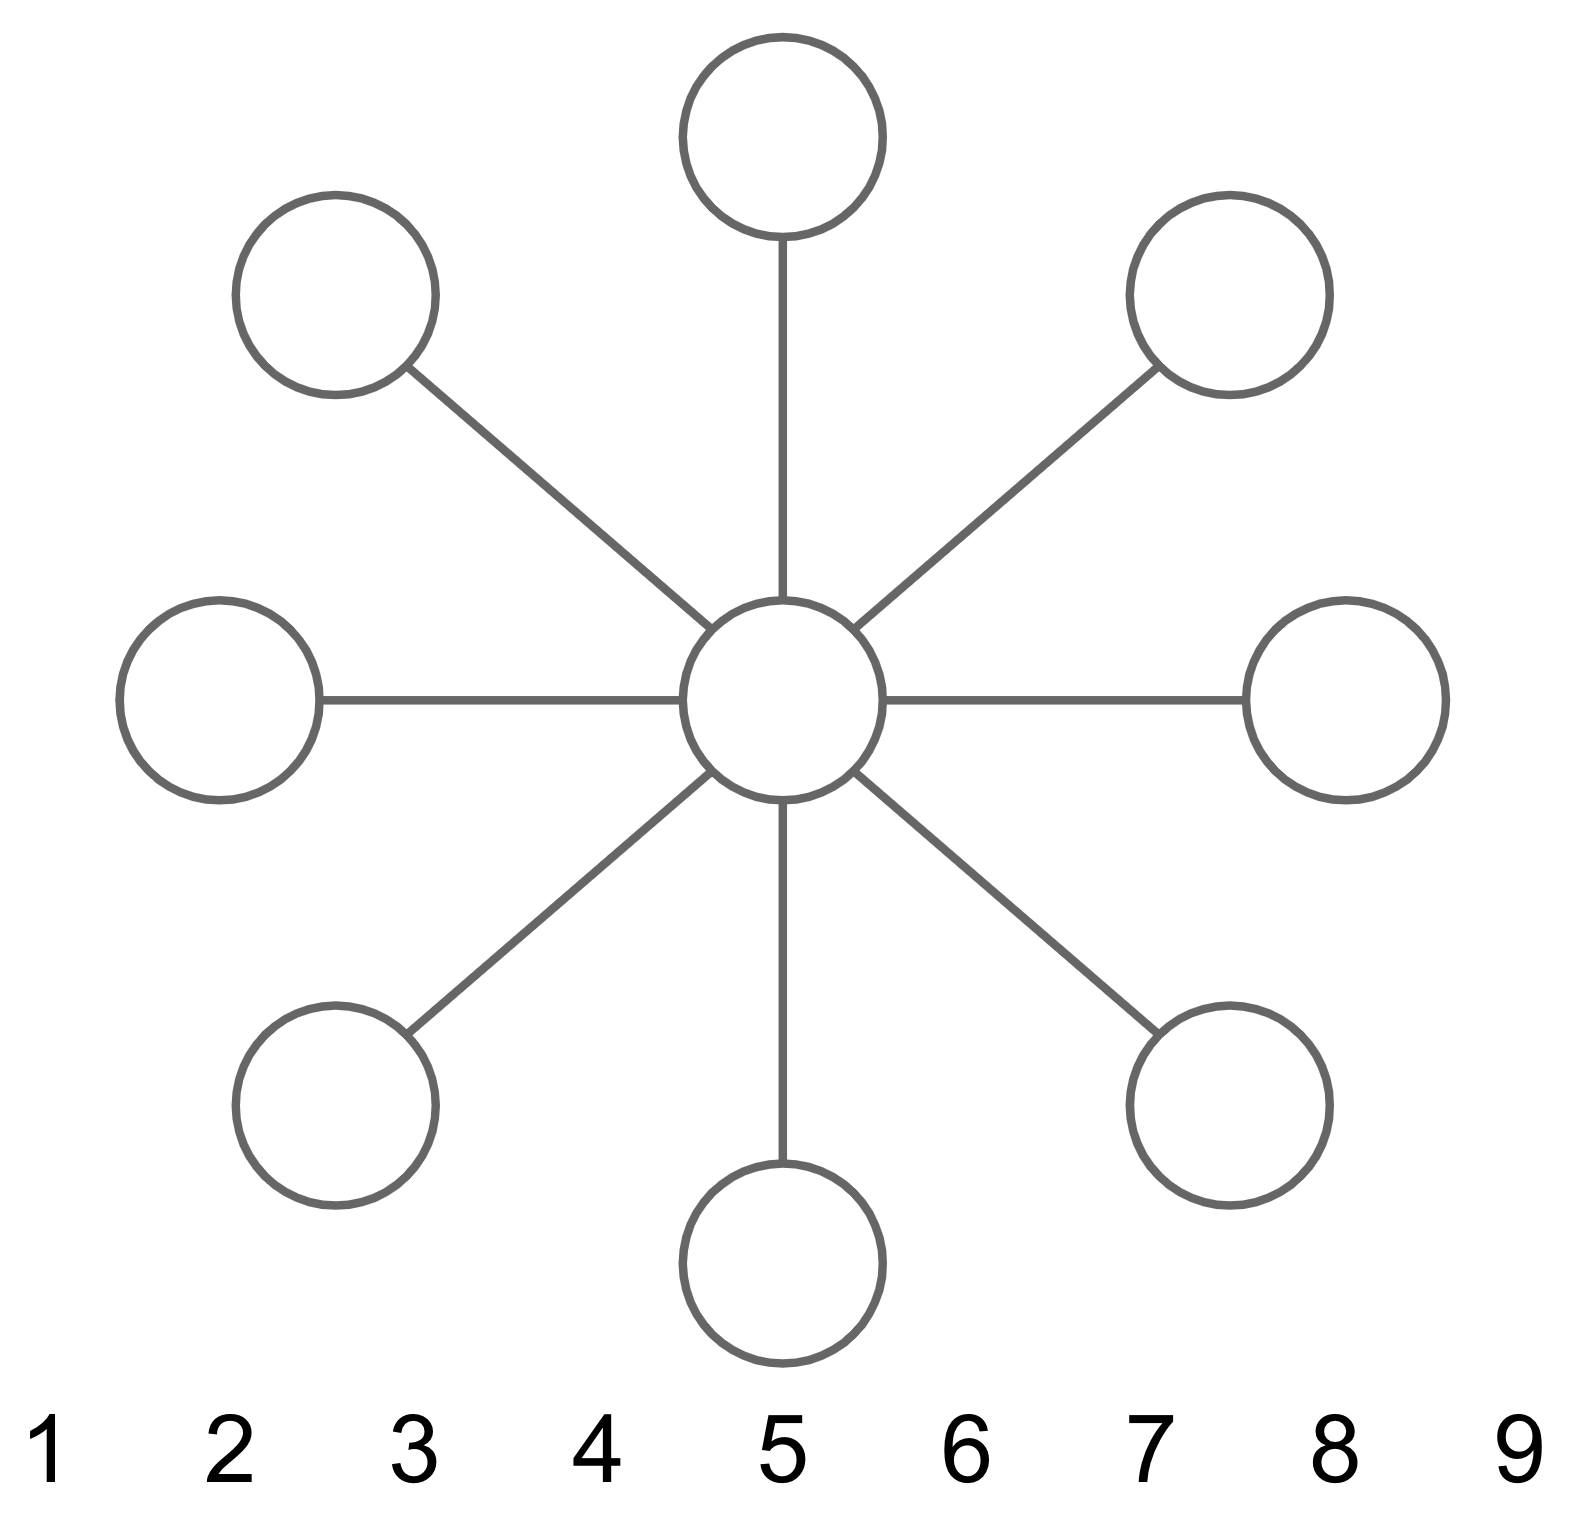 A circle surrounded by eight identical, equally spaced circles in a circle. The numbers 1 through 9 are underneath in a row.